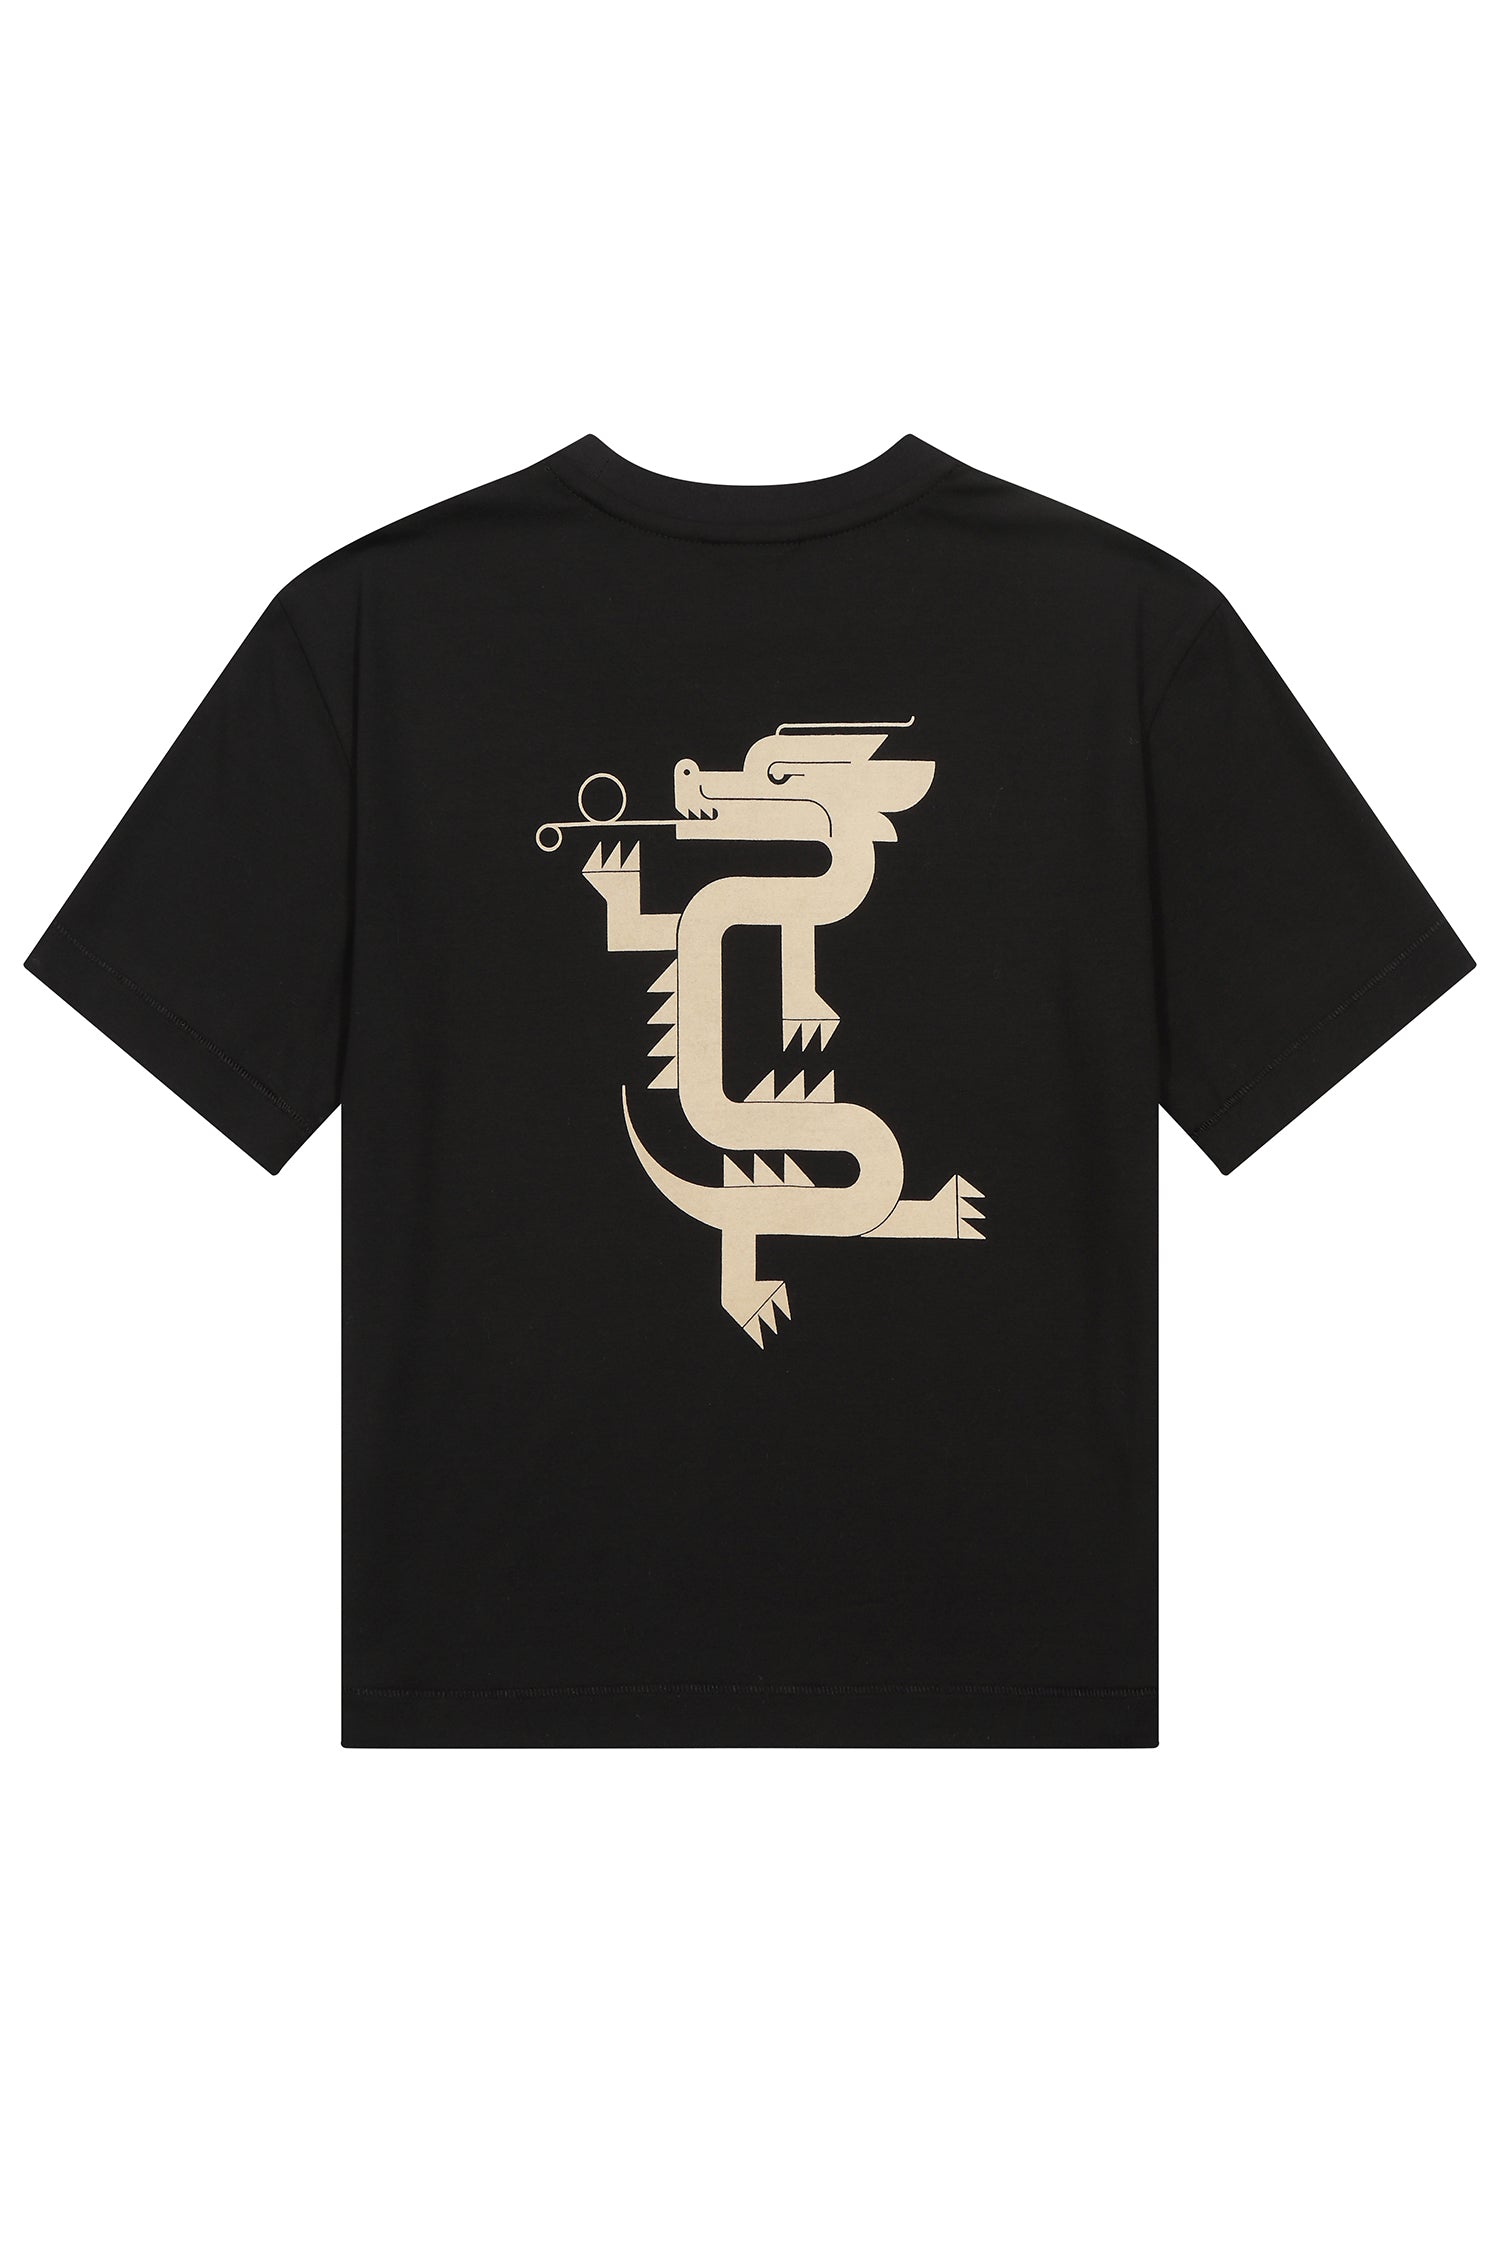 Year Of The Dragon Fitted Tee